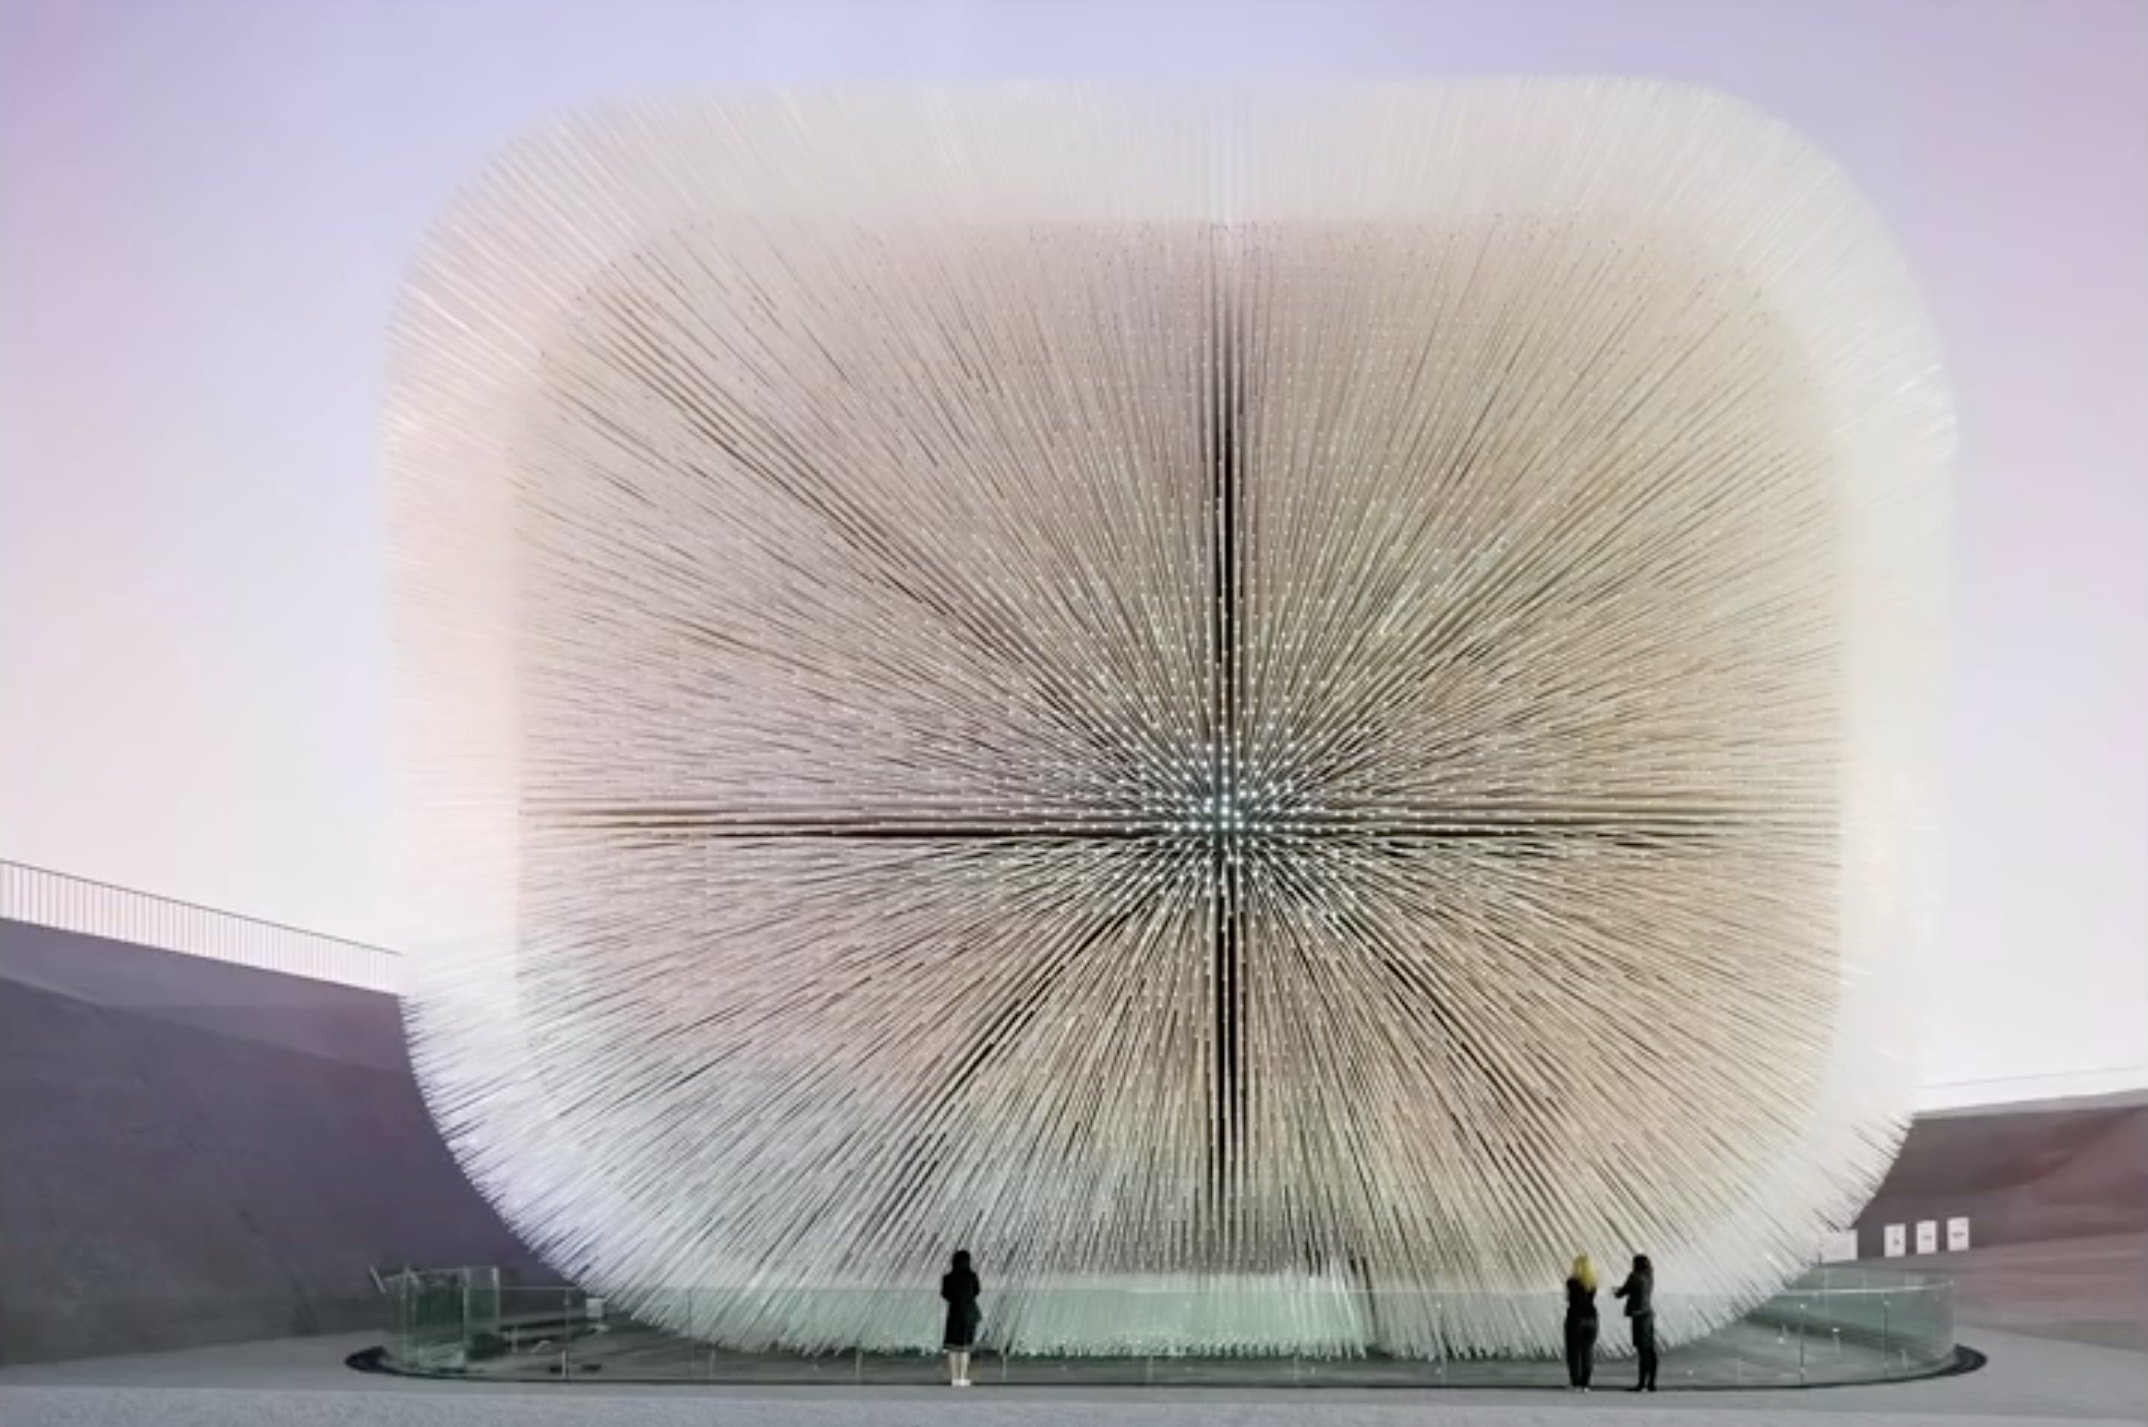 Seed Cathedral installation by Thomas Heatherwick